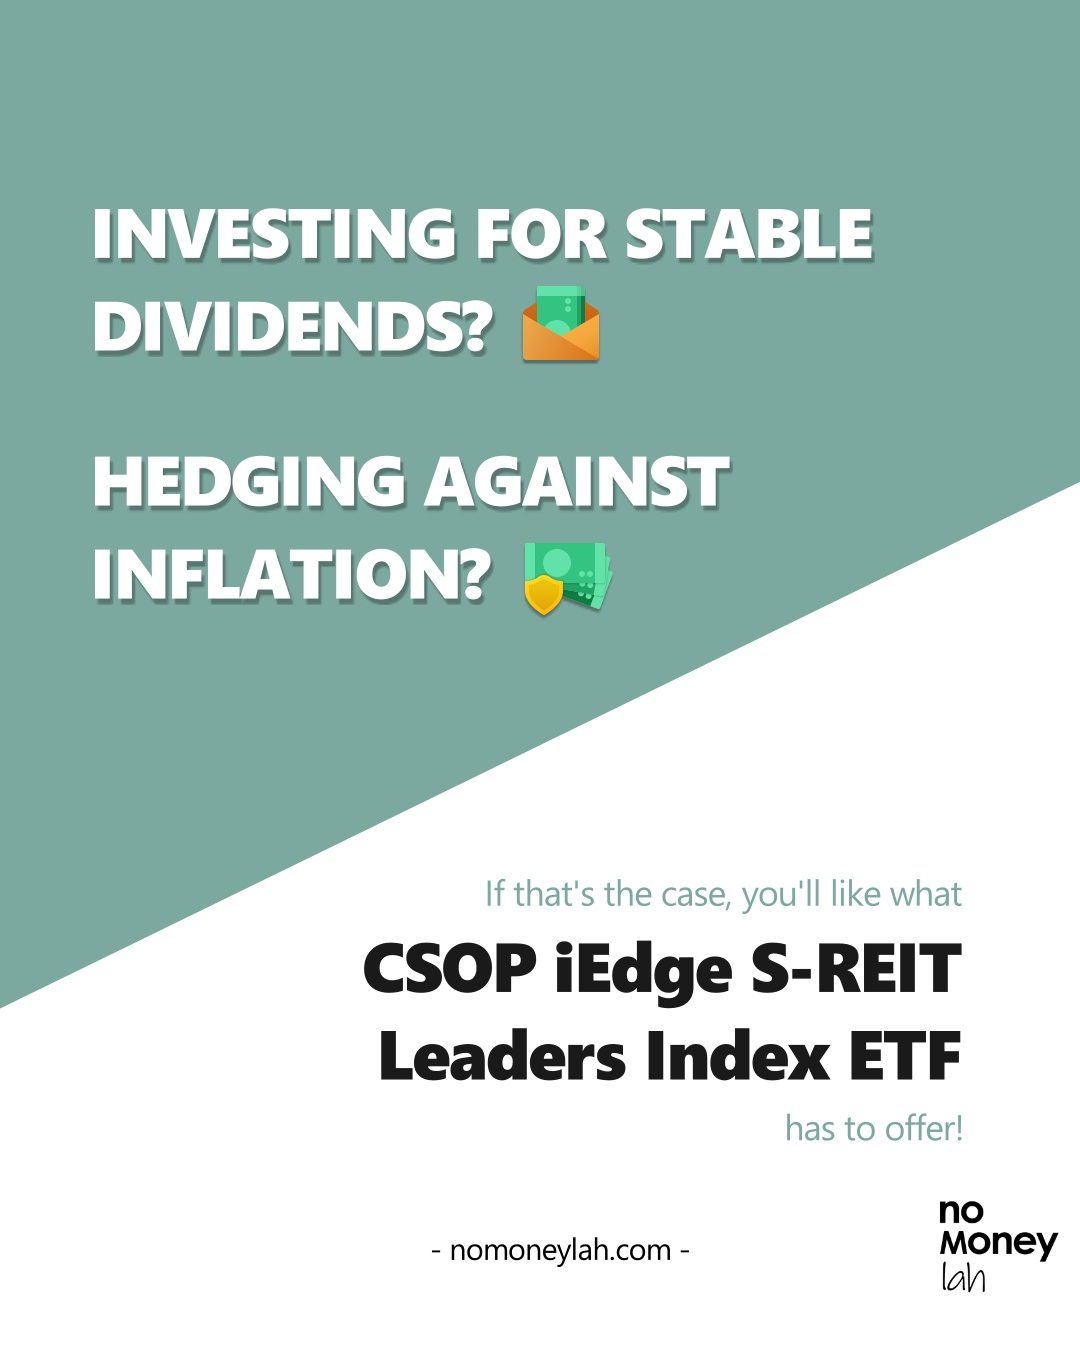 For who - CSOP iEdge S-REIT Leaders Index ETF